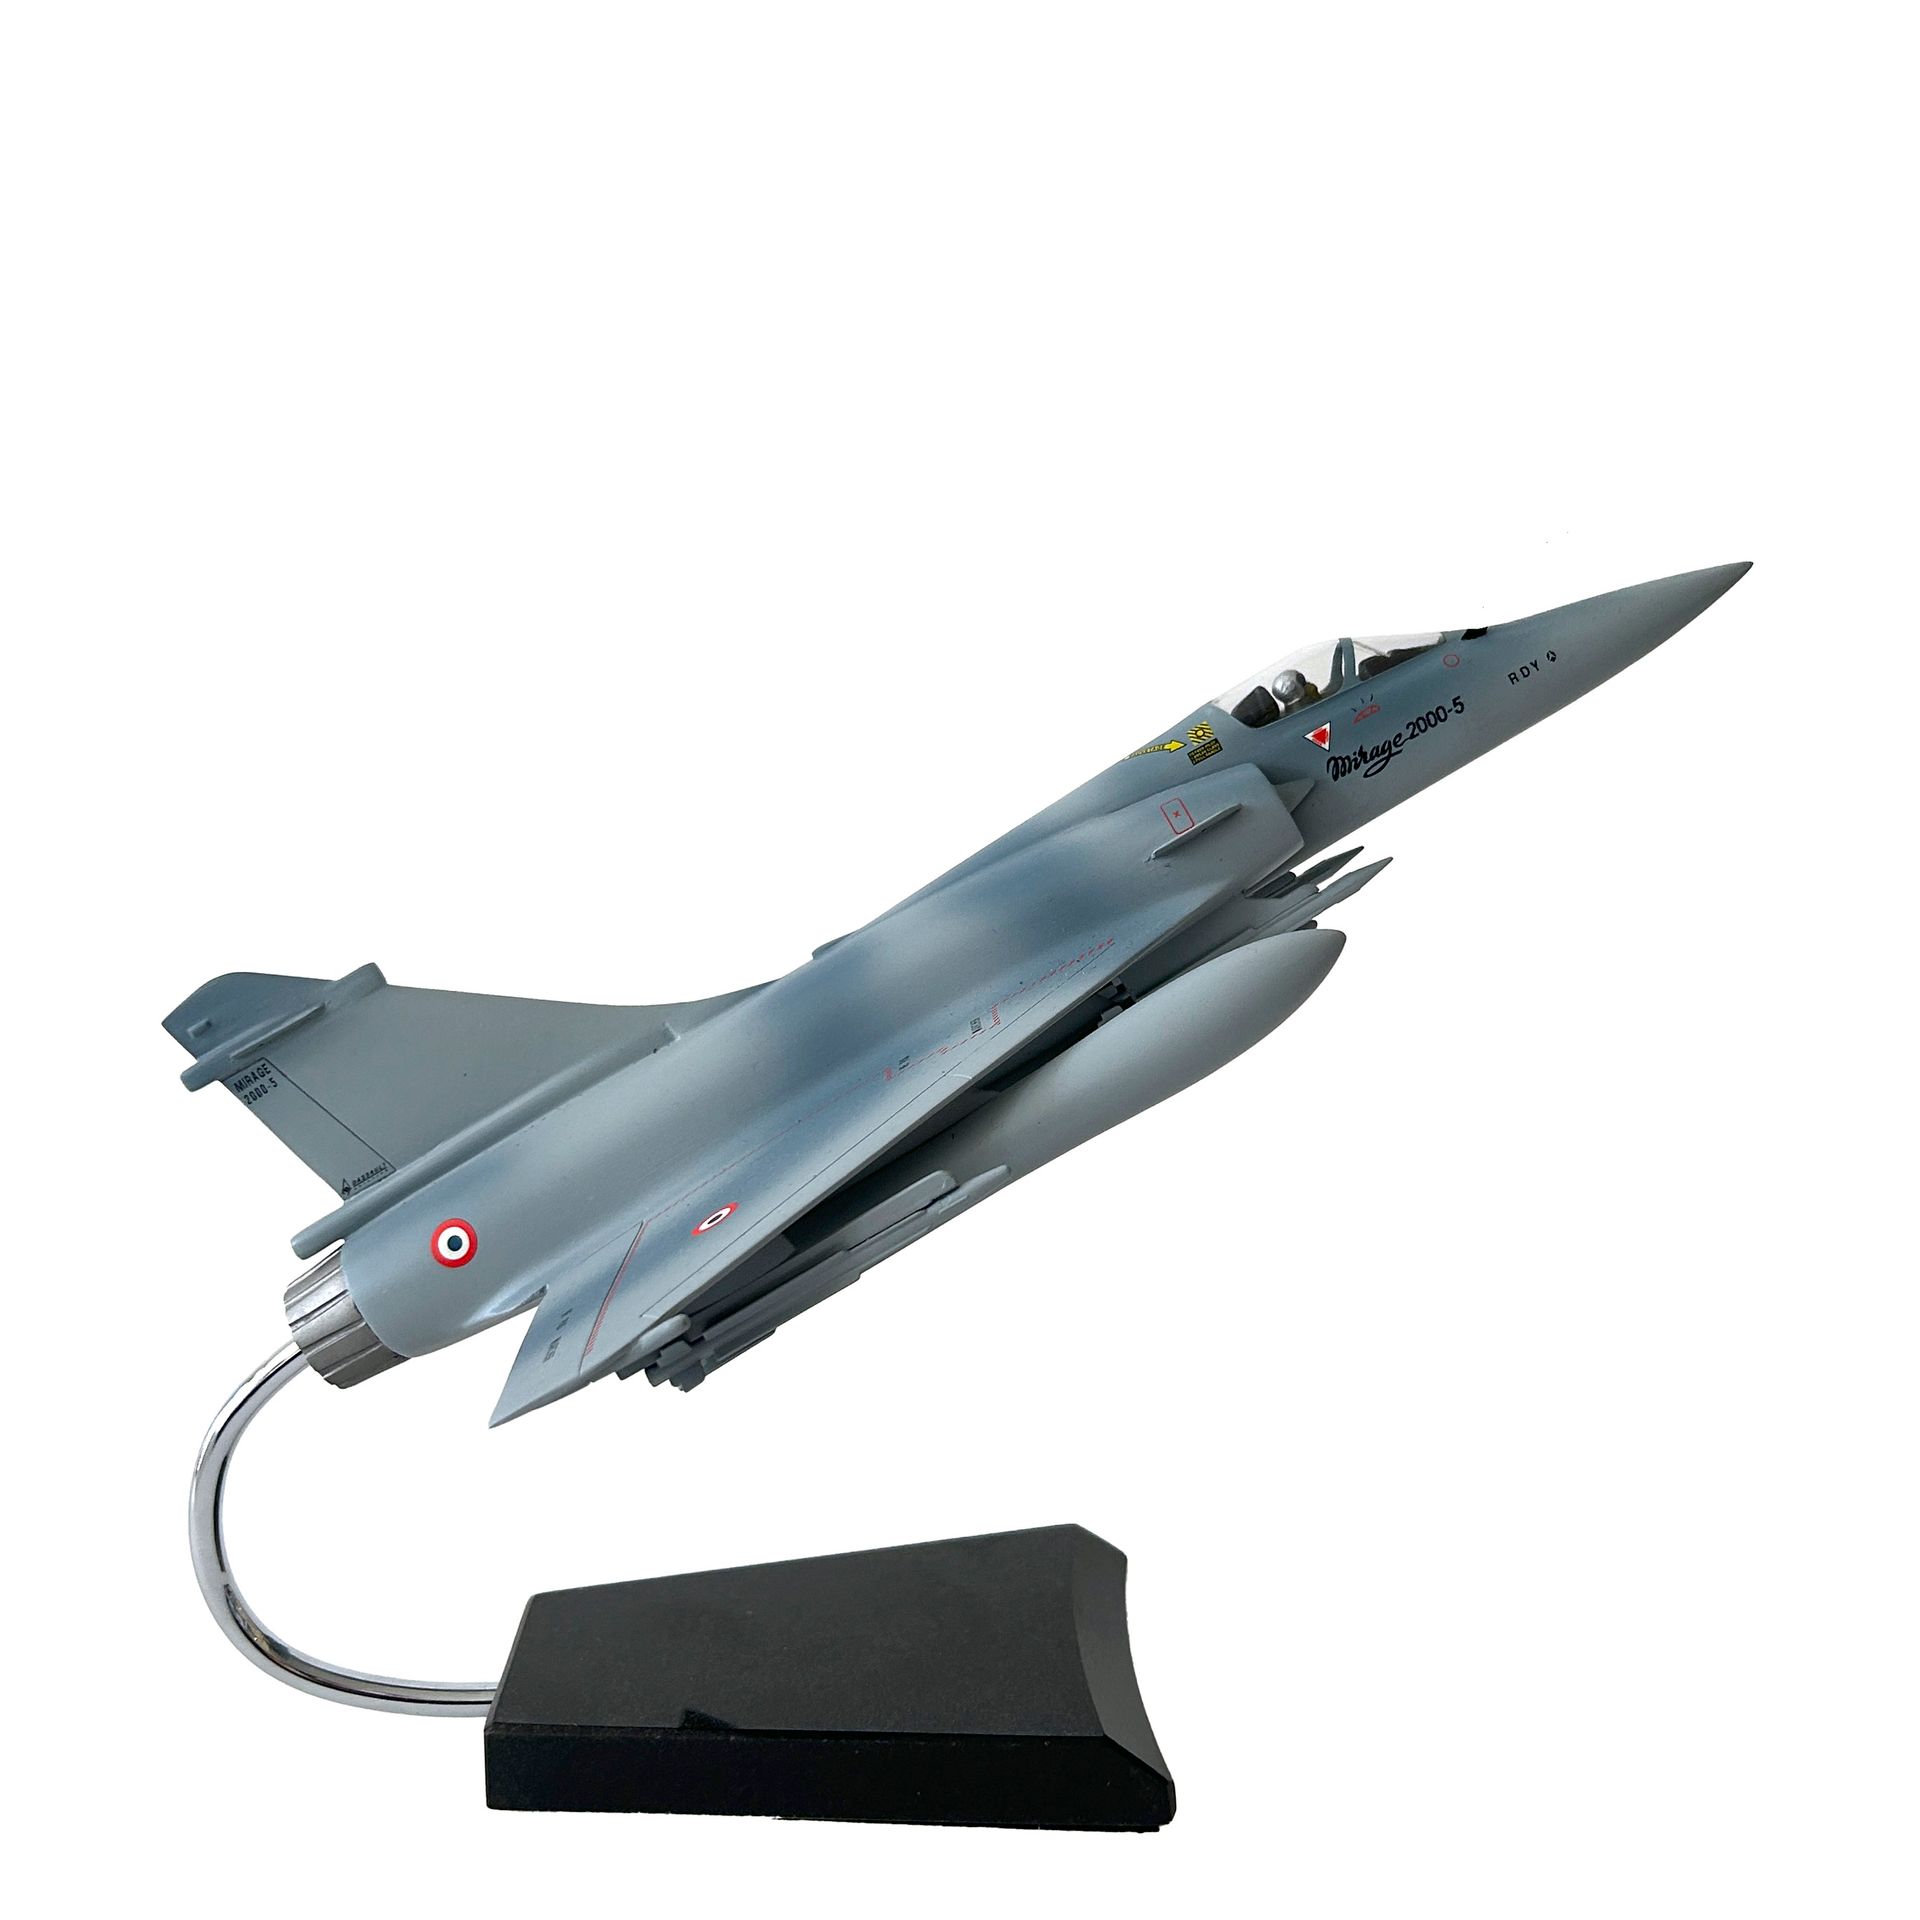 Null MIRAGE 2000-5 fighter aircraft model by DASSAULT AVIATION
on base
Scale: 1/&hellip;